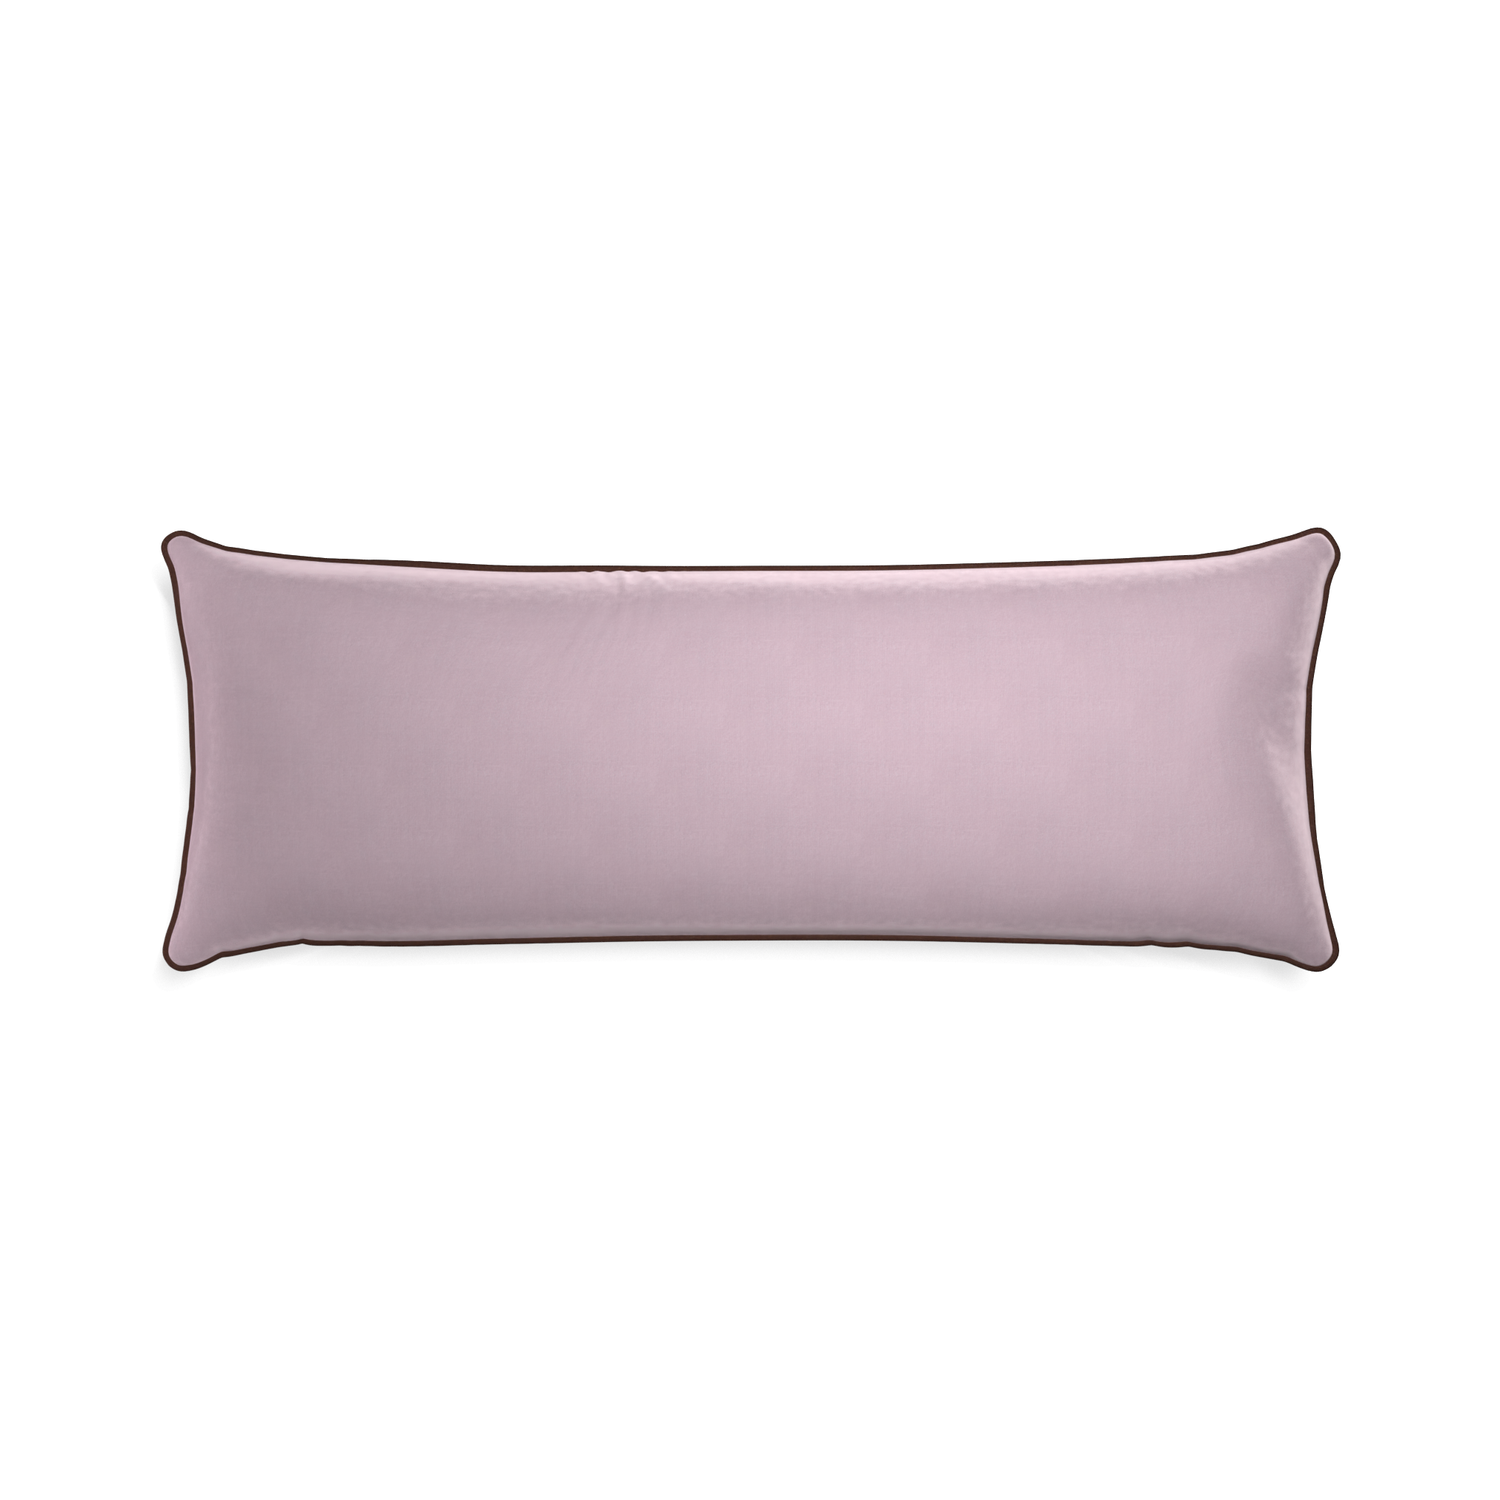 Xl-lumbar lilac velvet custom pillow with w piping on white background